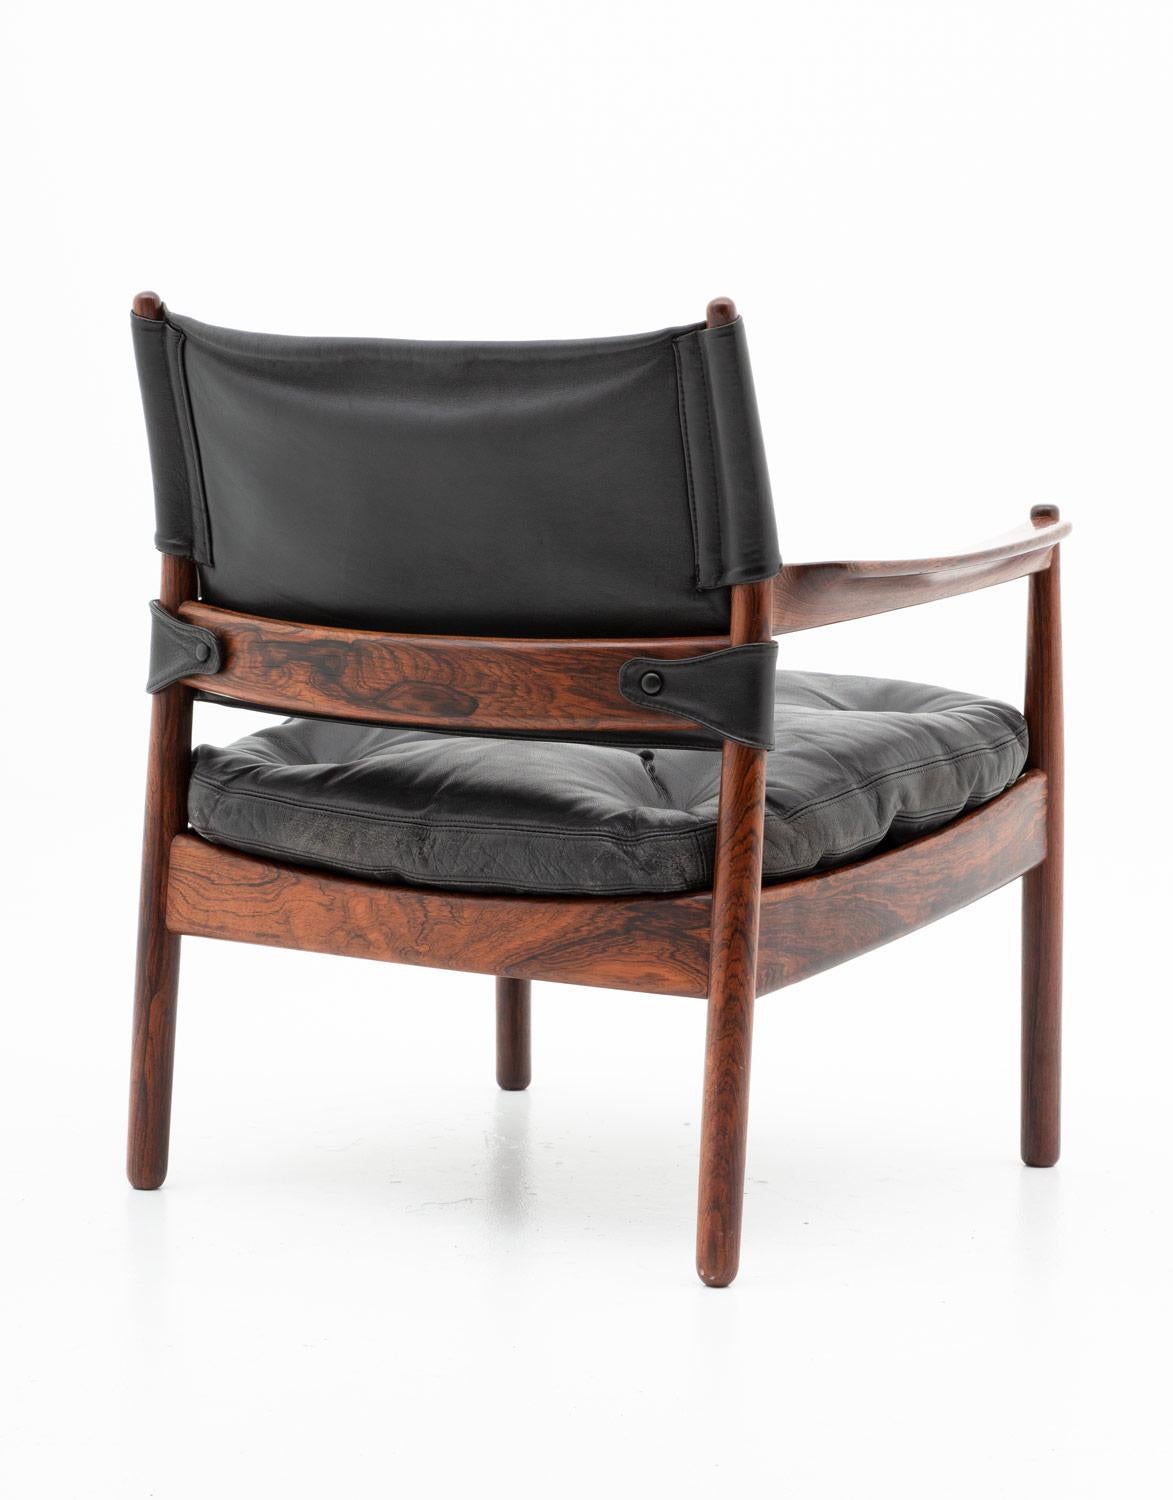 Swedish Scandinavian Leather and Rosewood Lounge Chairs by Gunnar Myrstrand, Sweden